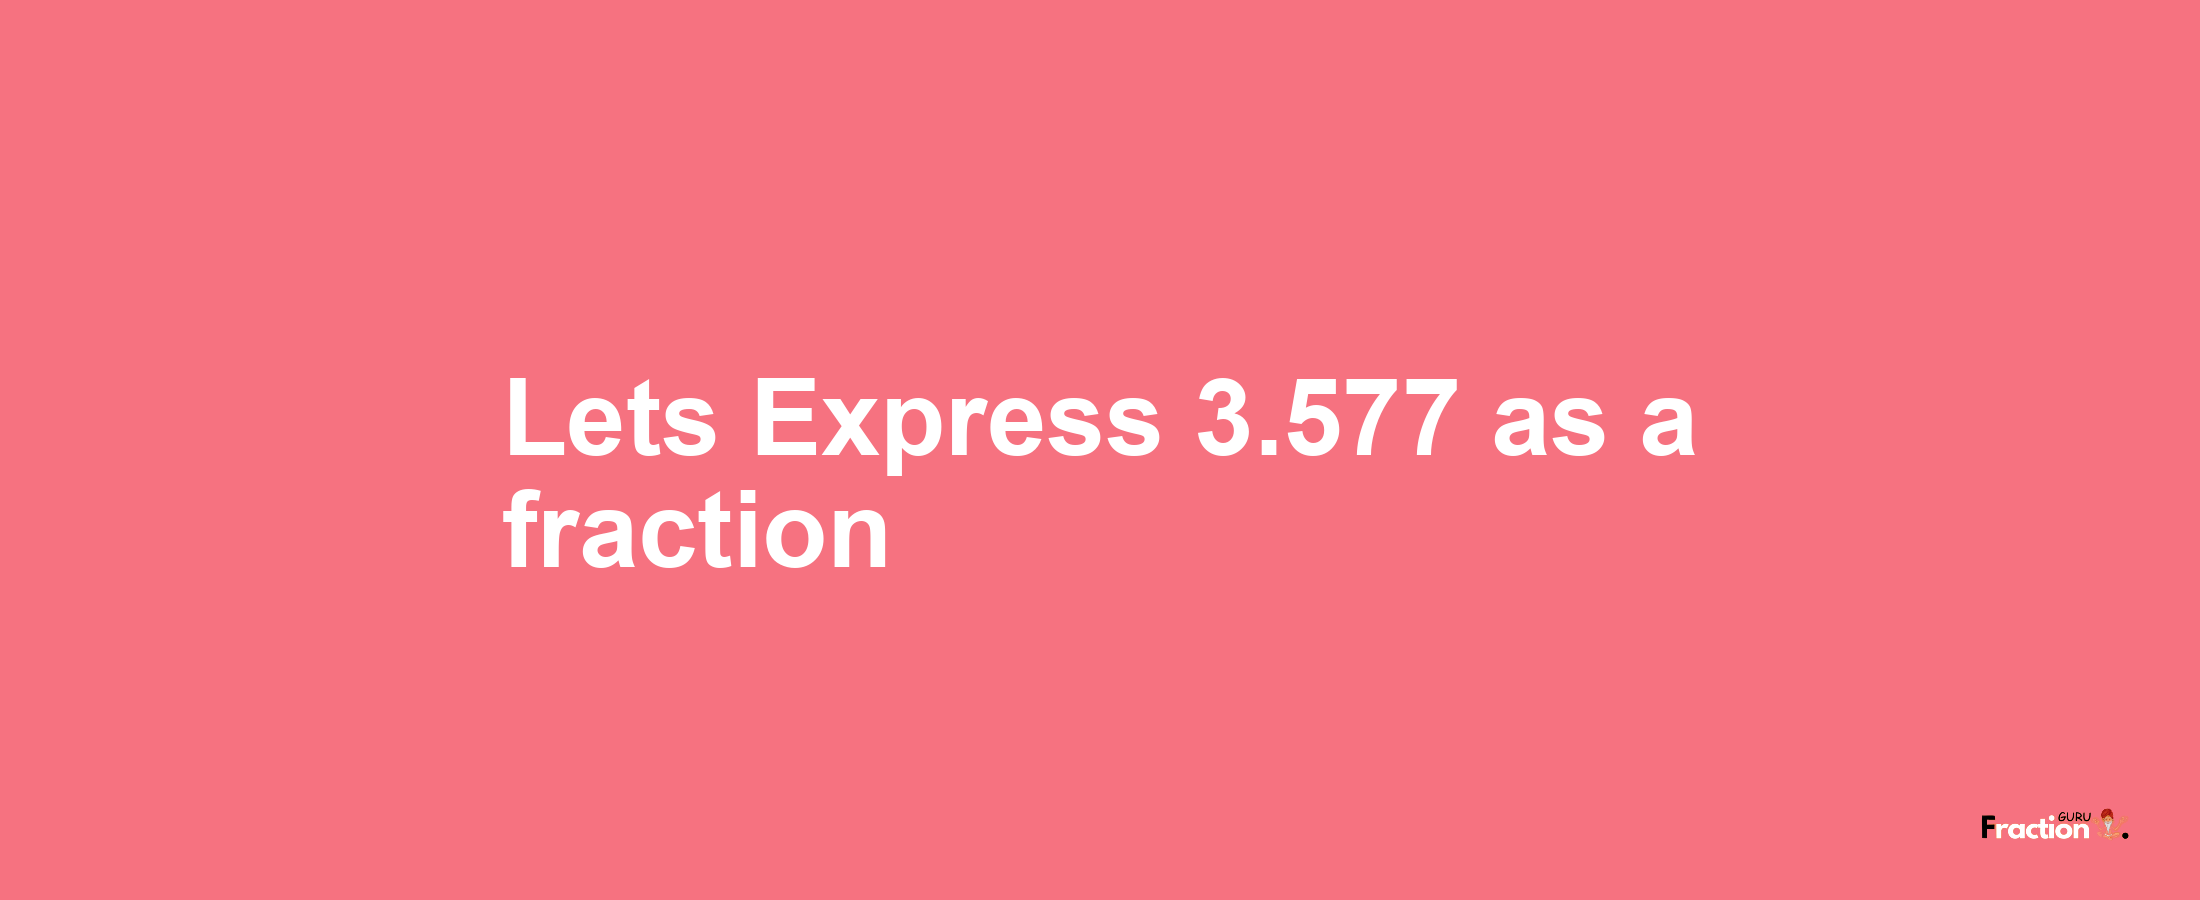 Lets Express 3.577 as afraction